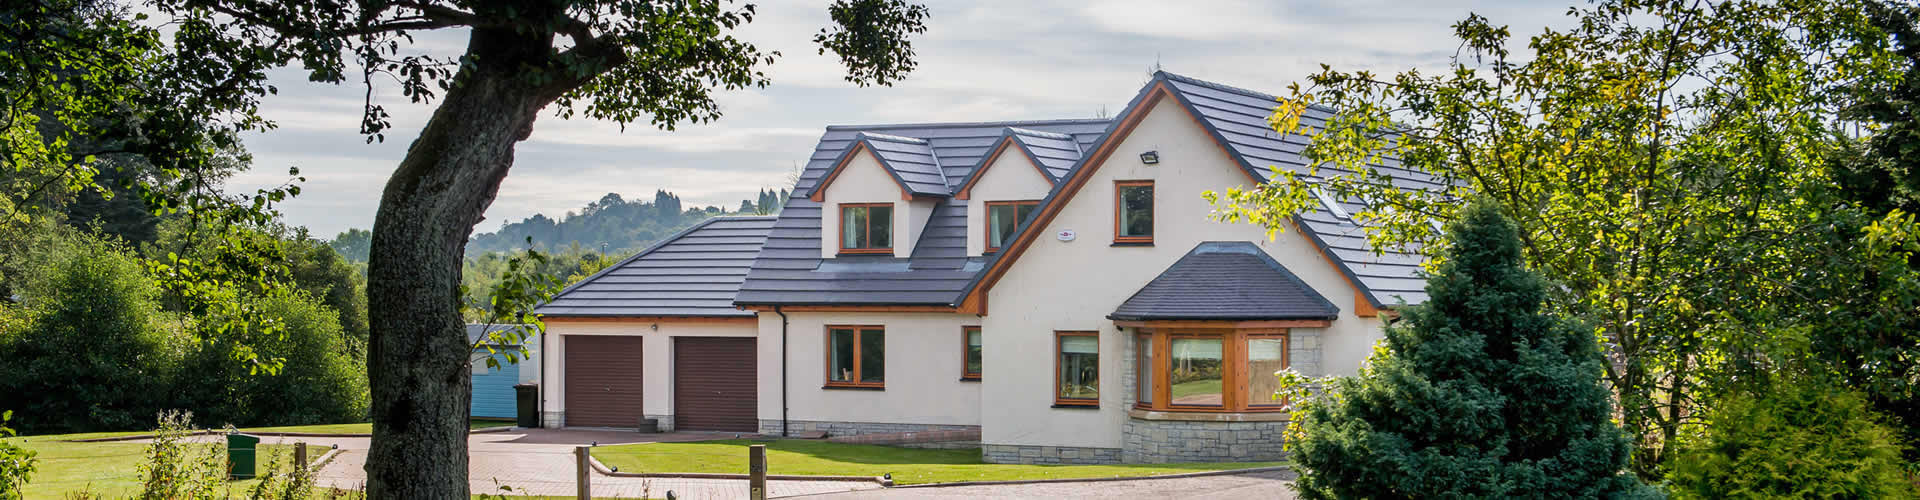 Housing developments in Perthshire and Aberdeenshire